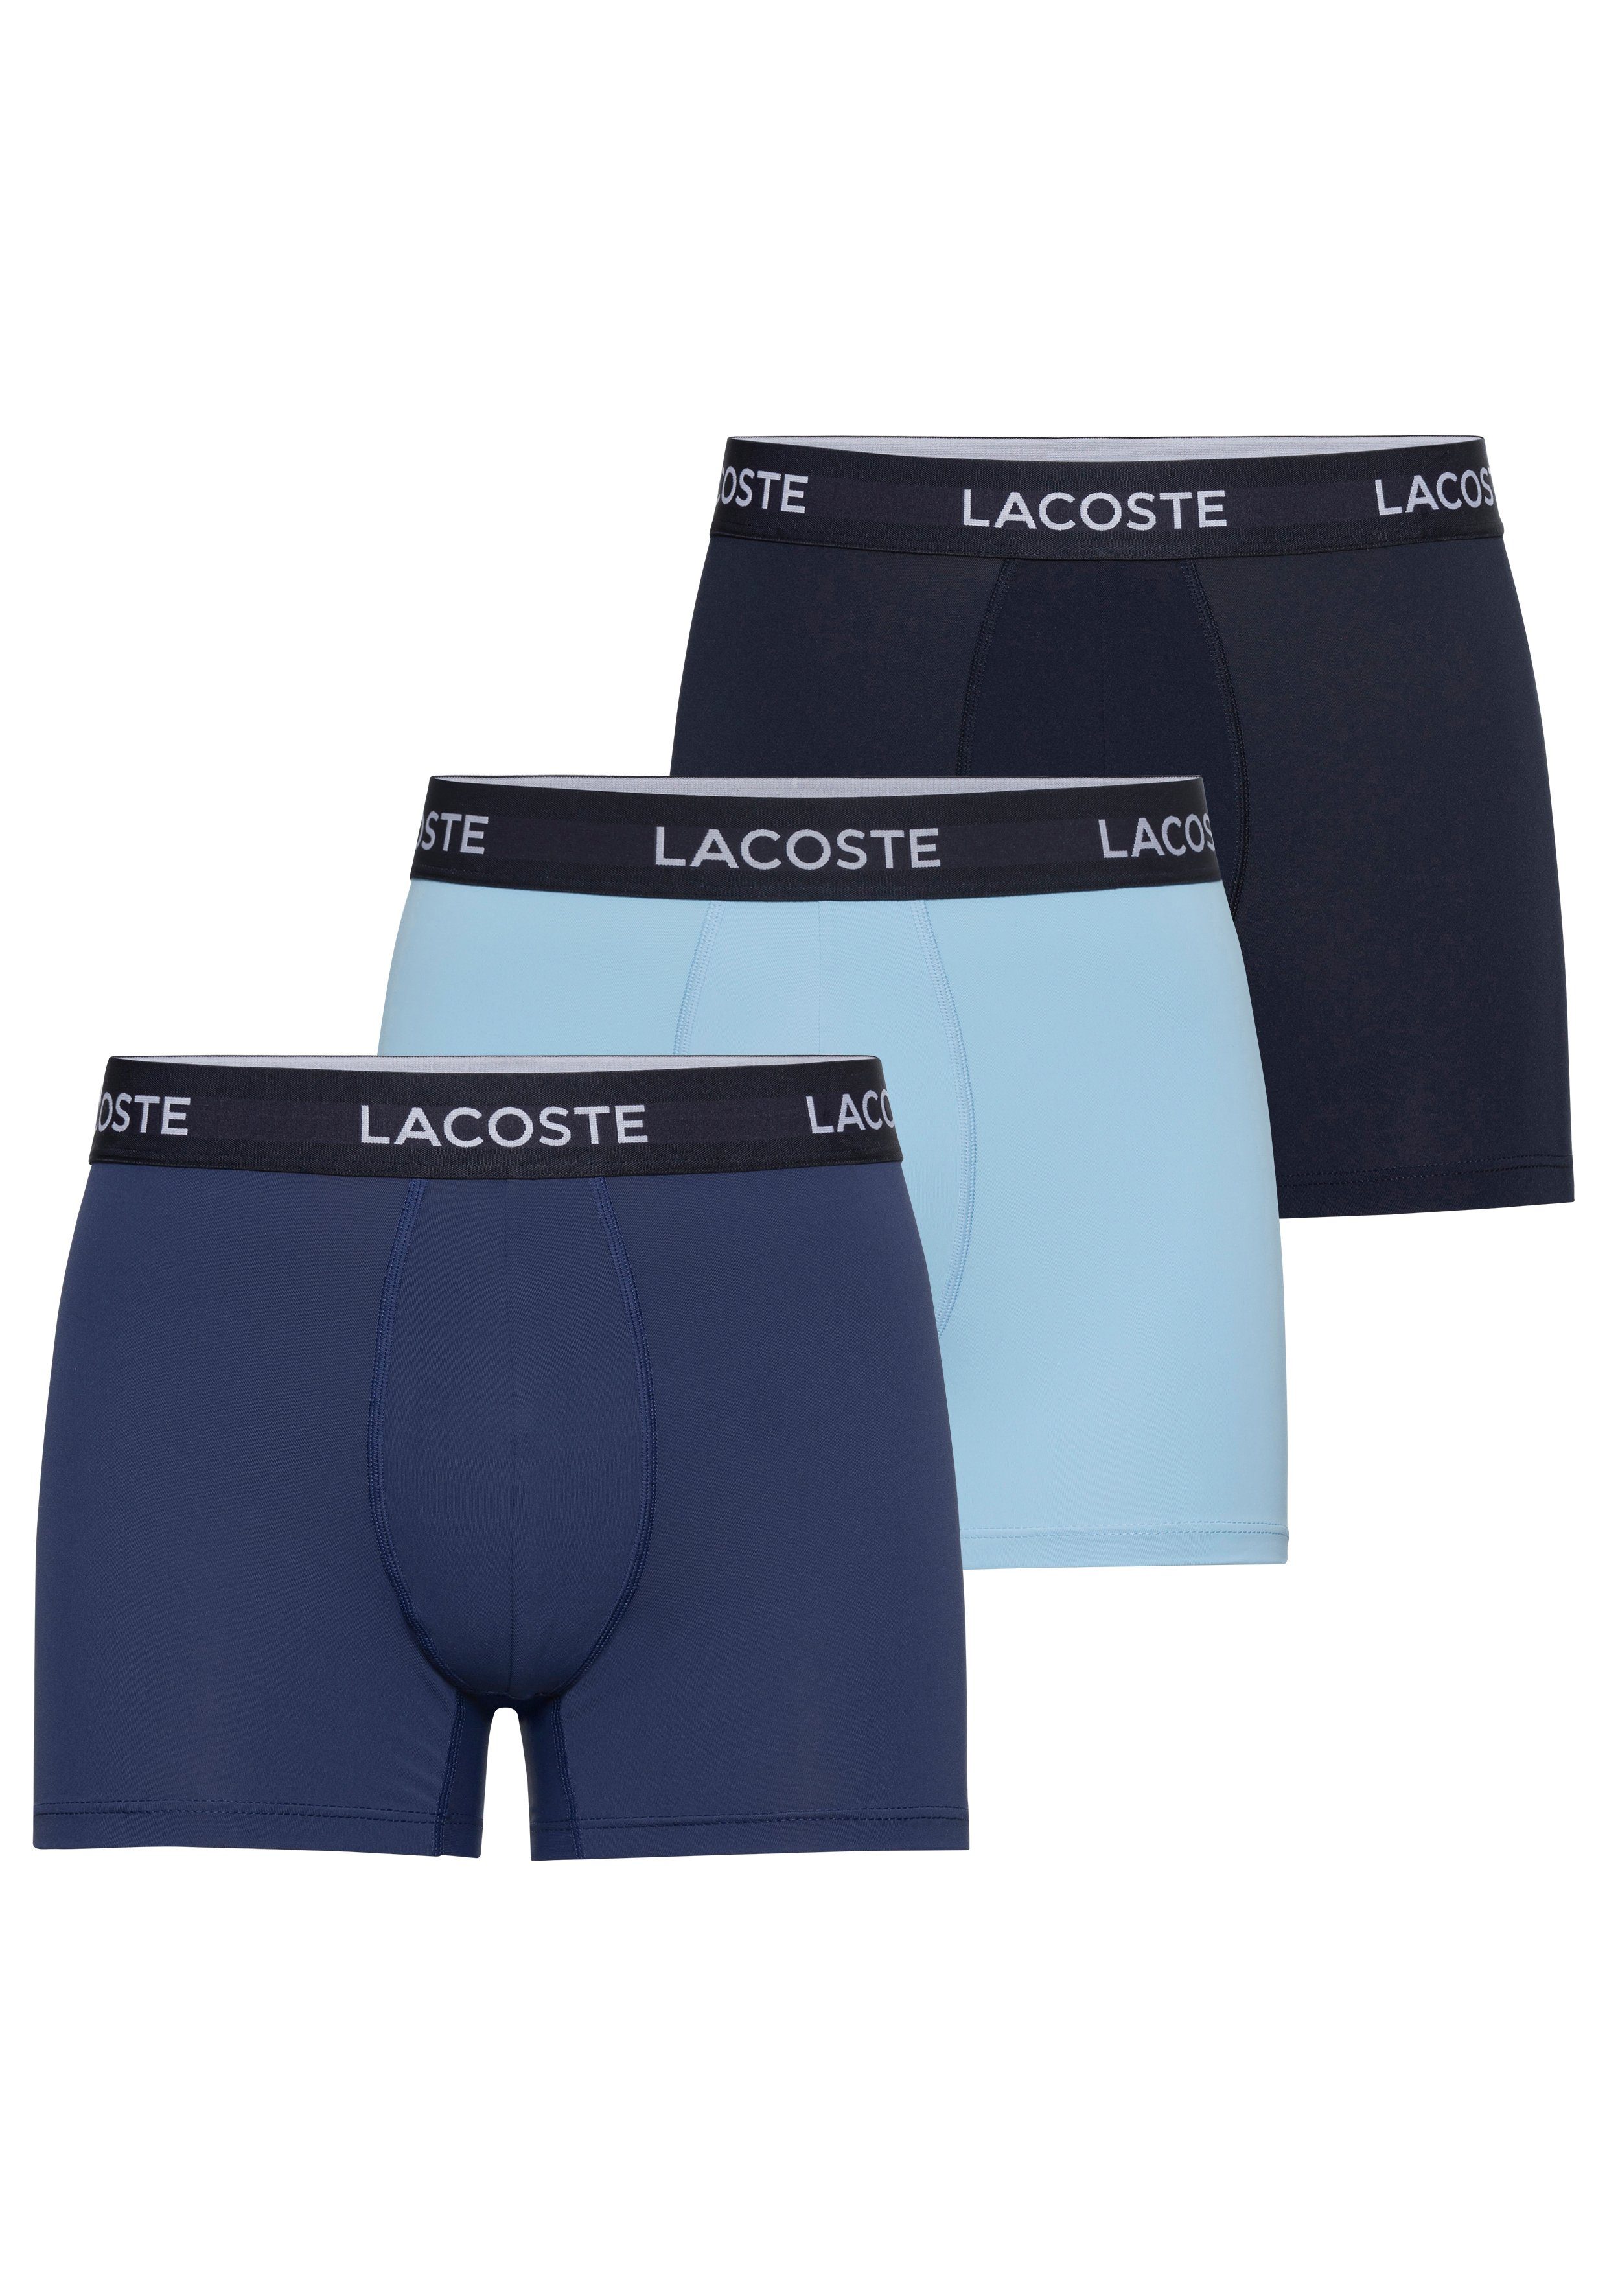 Lacoste Boxer VUC light navy / 3-St) (Packung, blue / blue